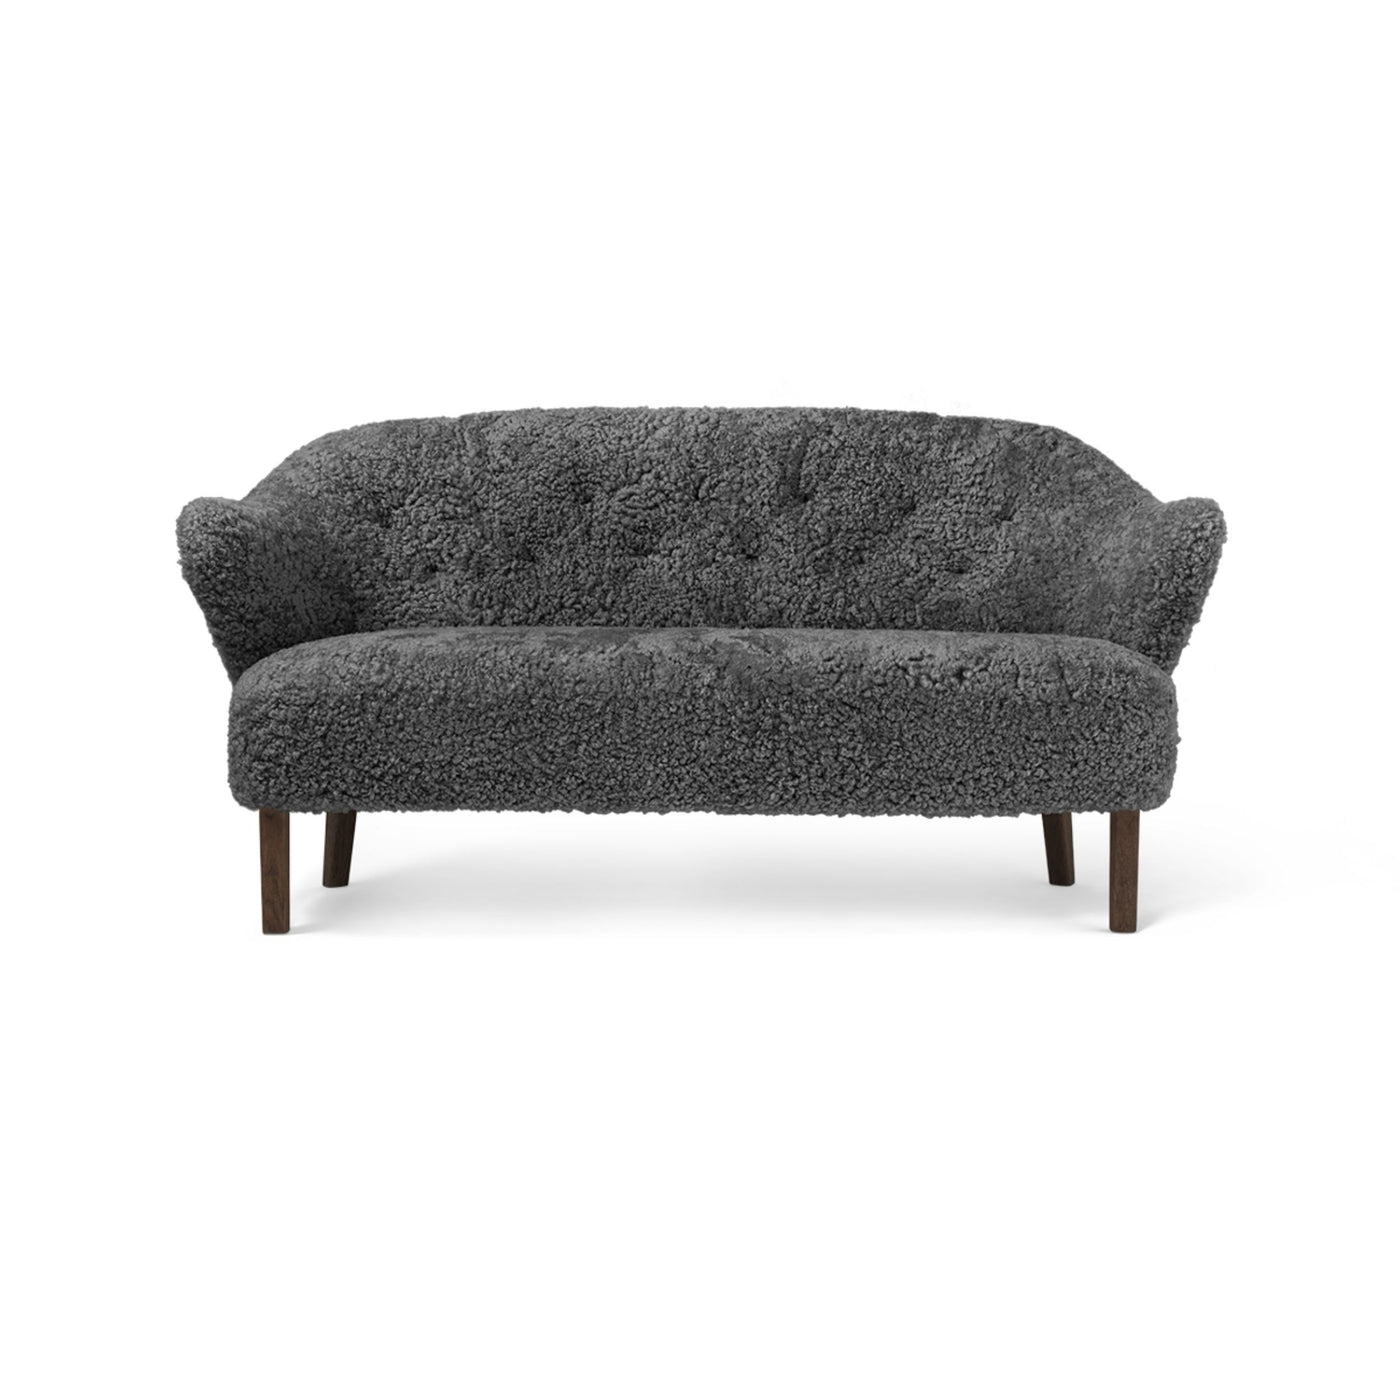 By Lassen Ingeborg sofa with smoked oak legs. Made to order from someday designs. #colour_sheepskin-anthracite